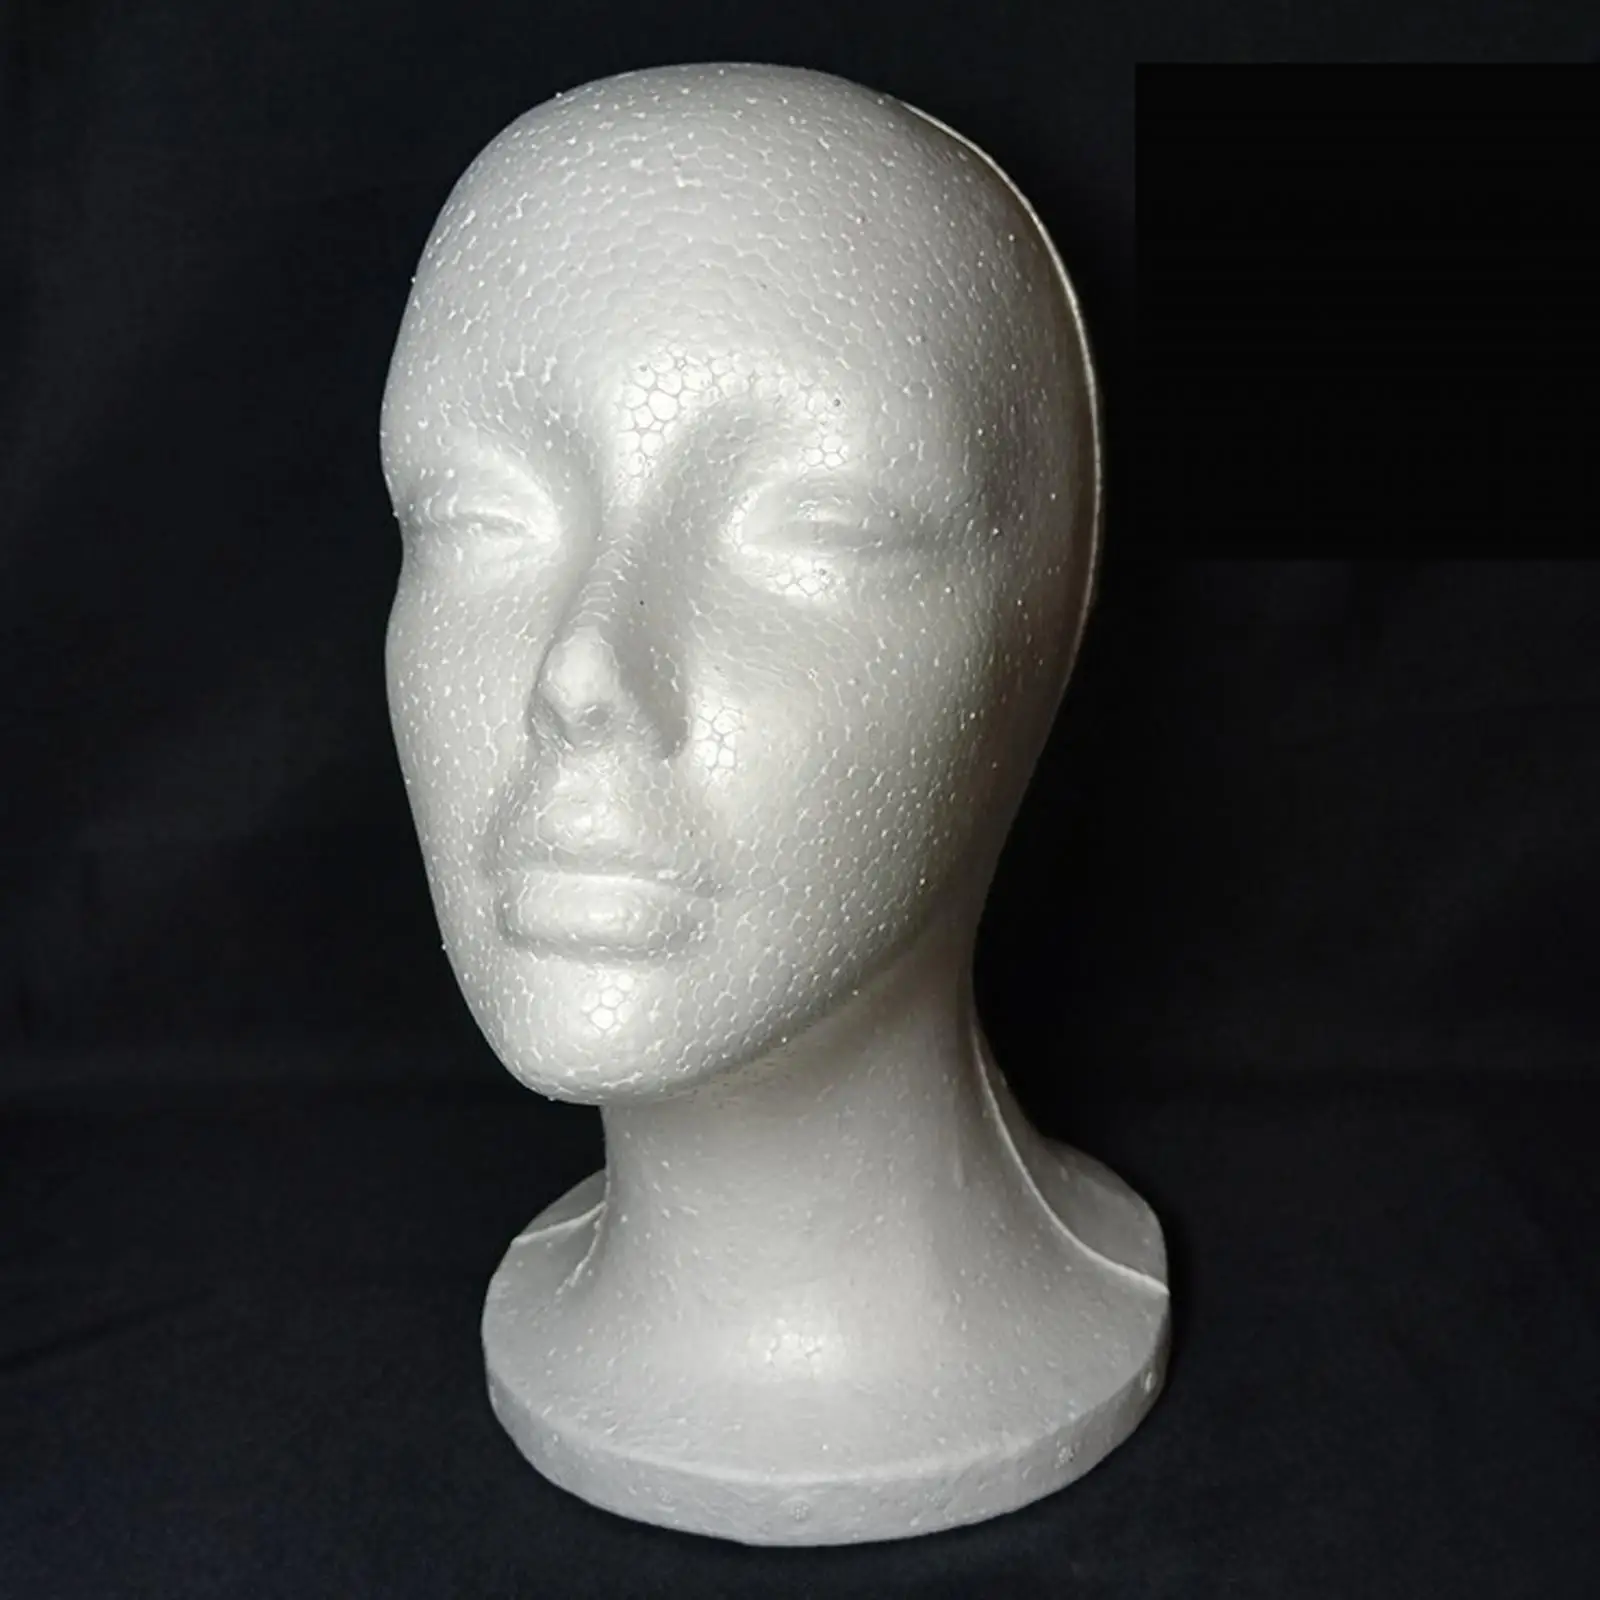 Foam Wig Head White Multi Functional Portable Mannequin Manikin Head Hat Display Stand Hairpieces Stand Holder for Salon Props